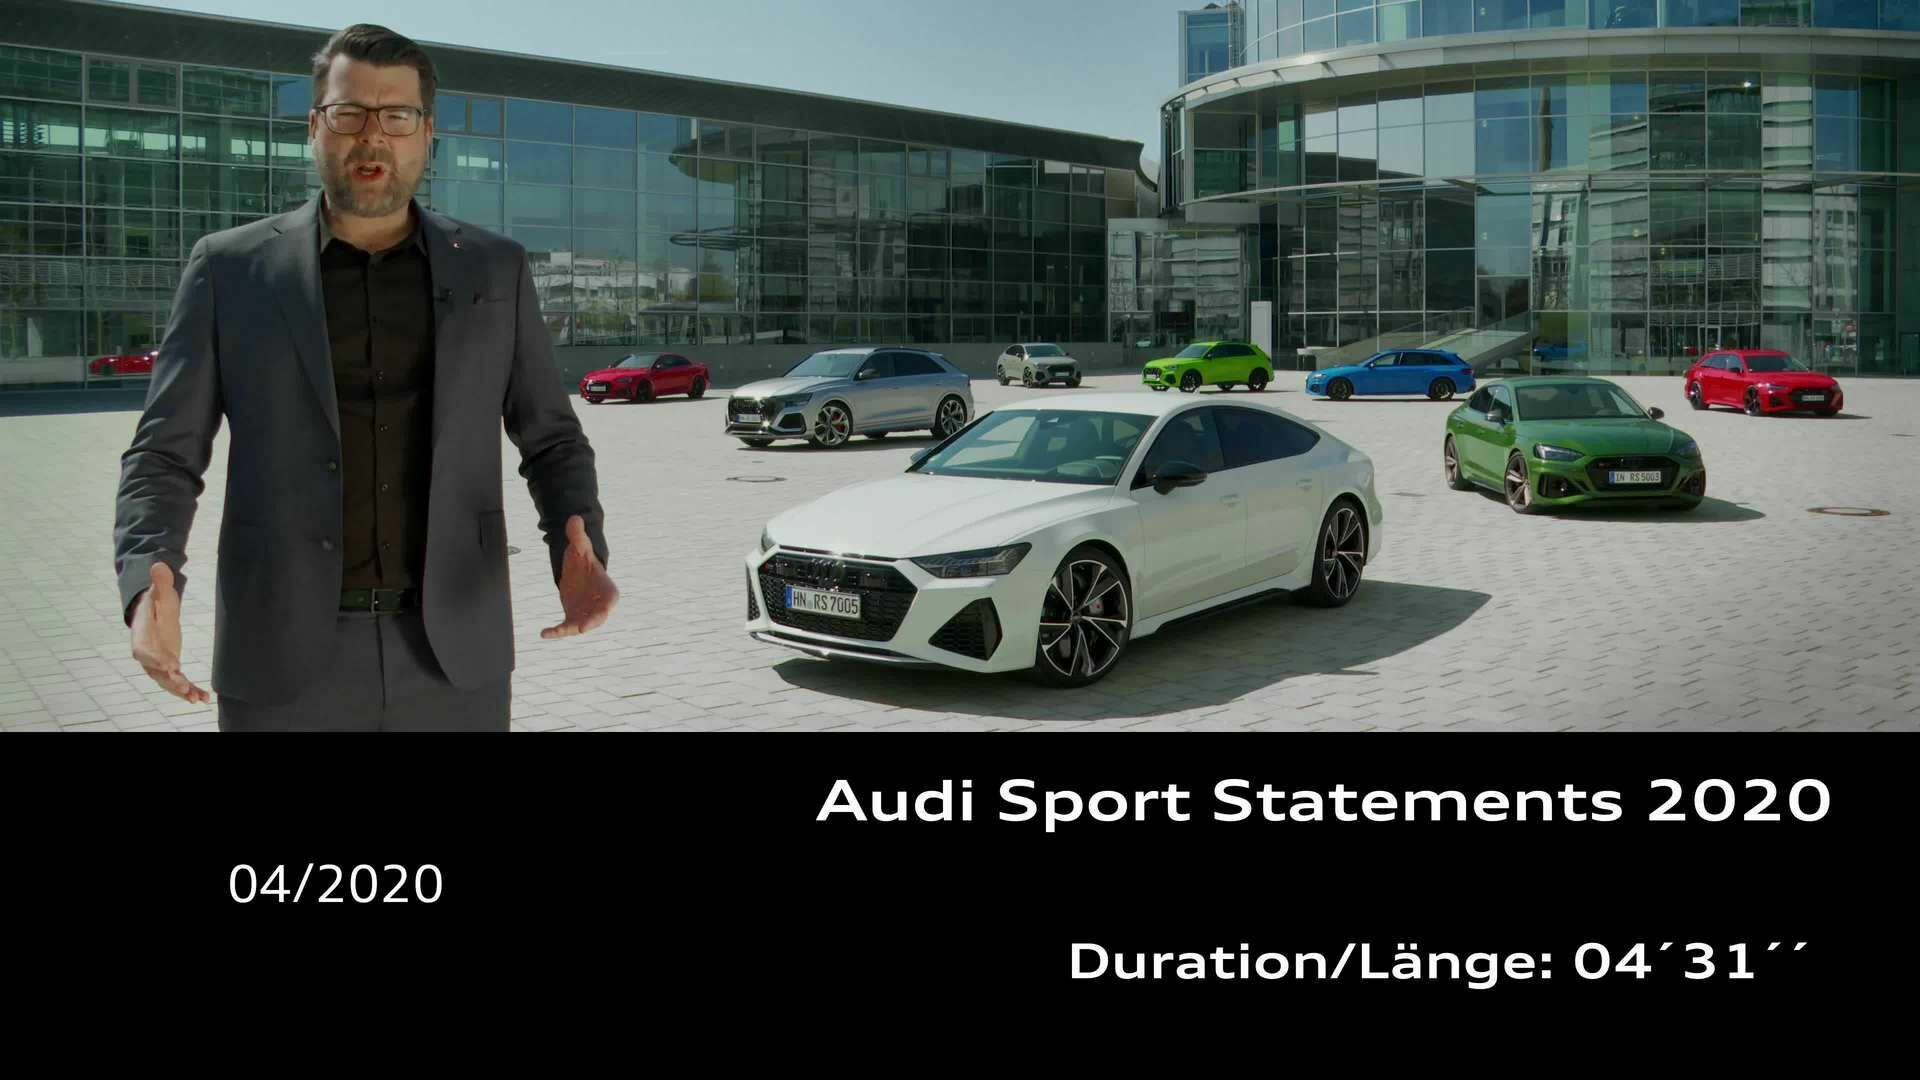 Footage: Statement Oliver Hoffmann on the Audi RS models